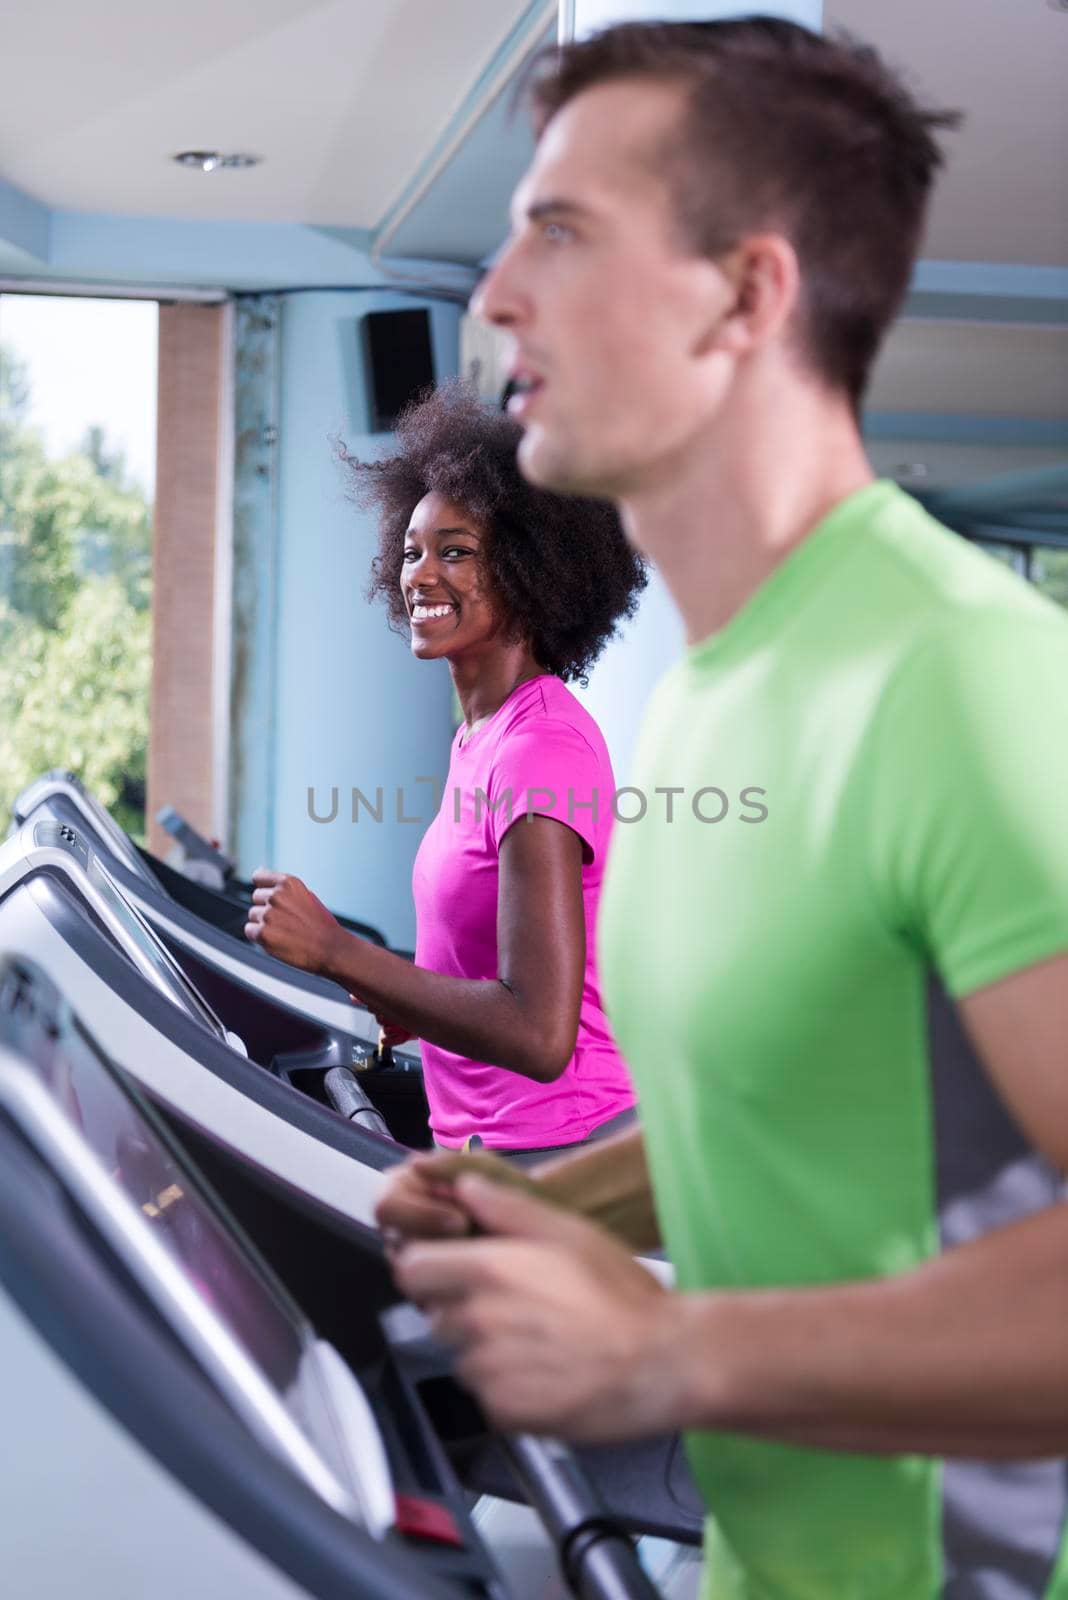 people exercisinng a cardio on treadmill by dotshock